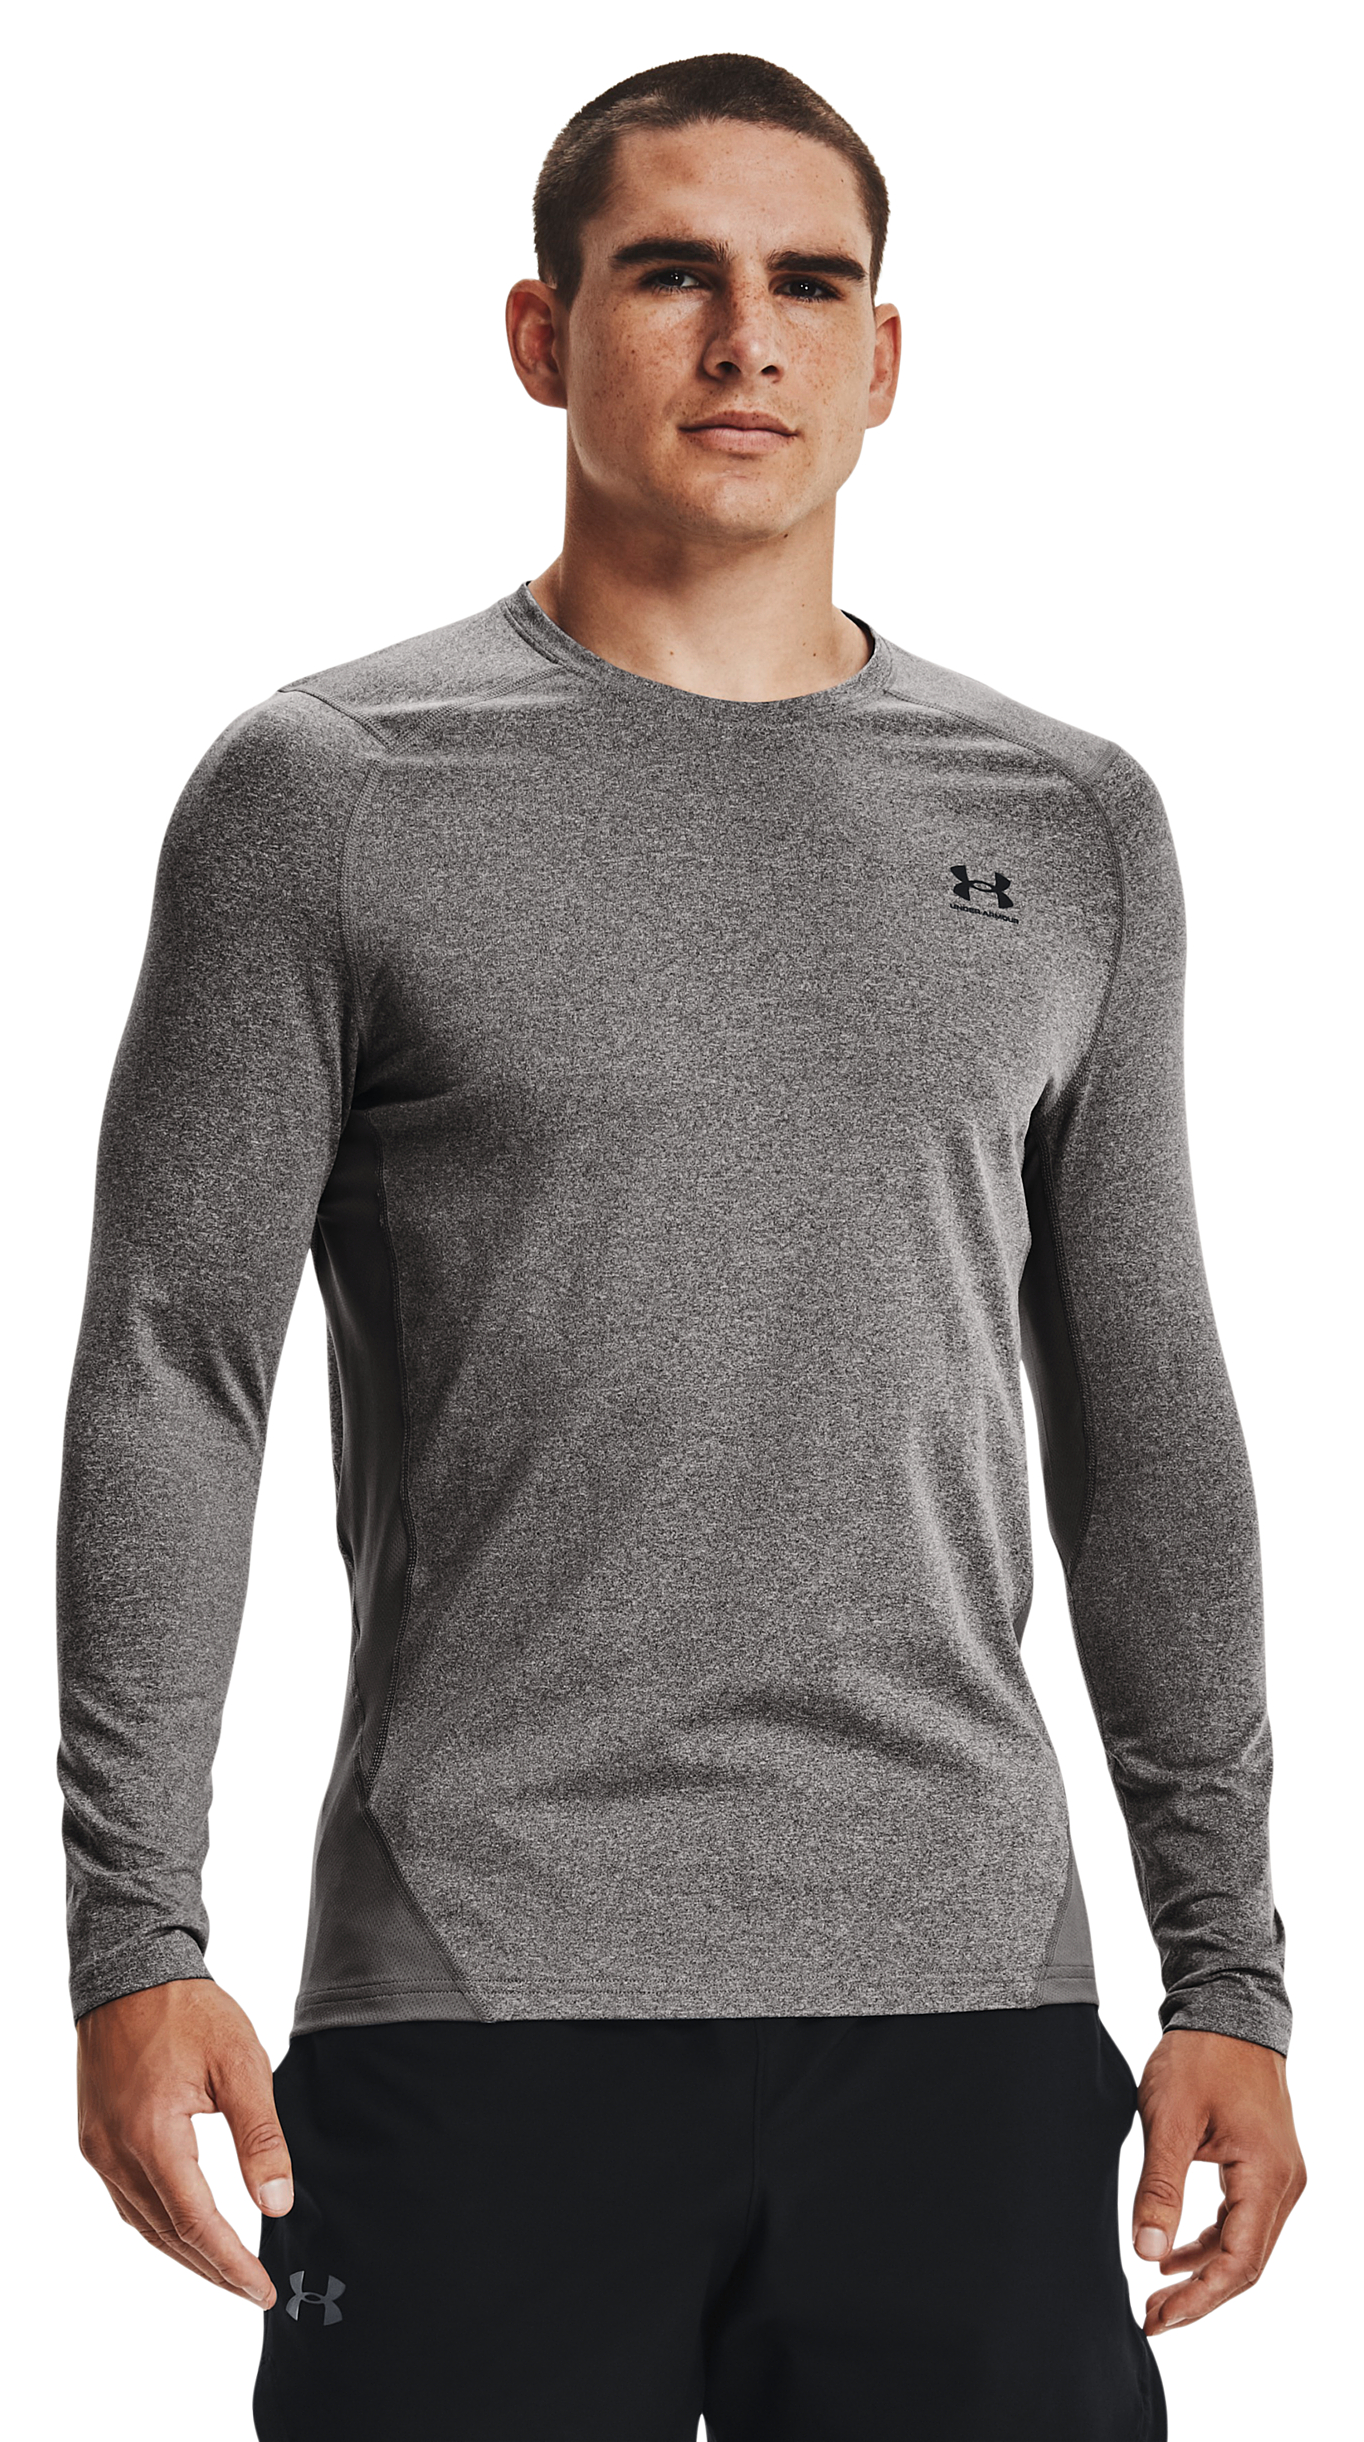 Under Armour ColdGear Fitted Long-Sleeve Crew for Men - Charcoal Light Heather/Black - LT